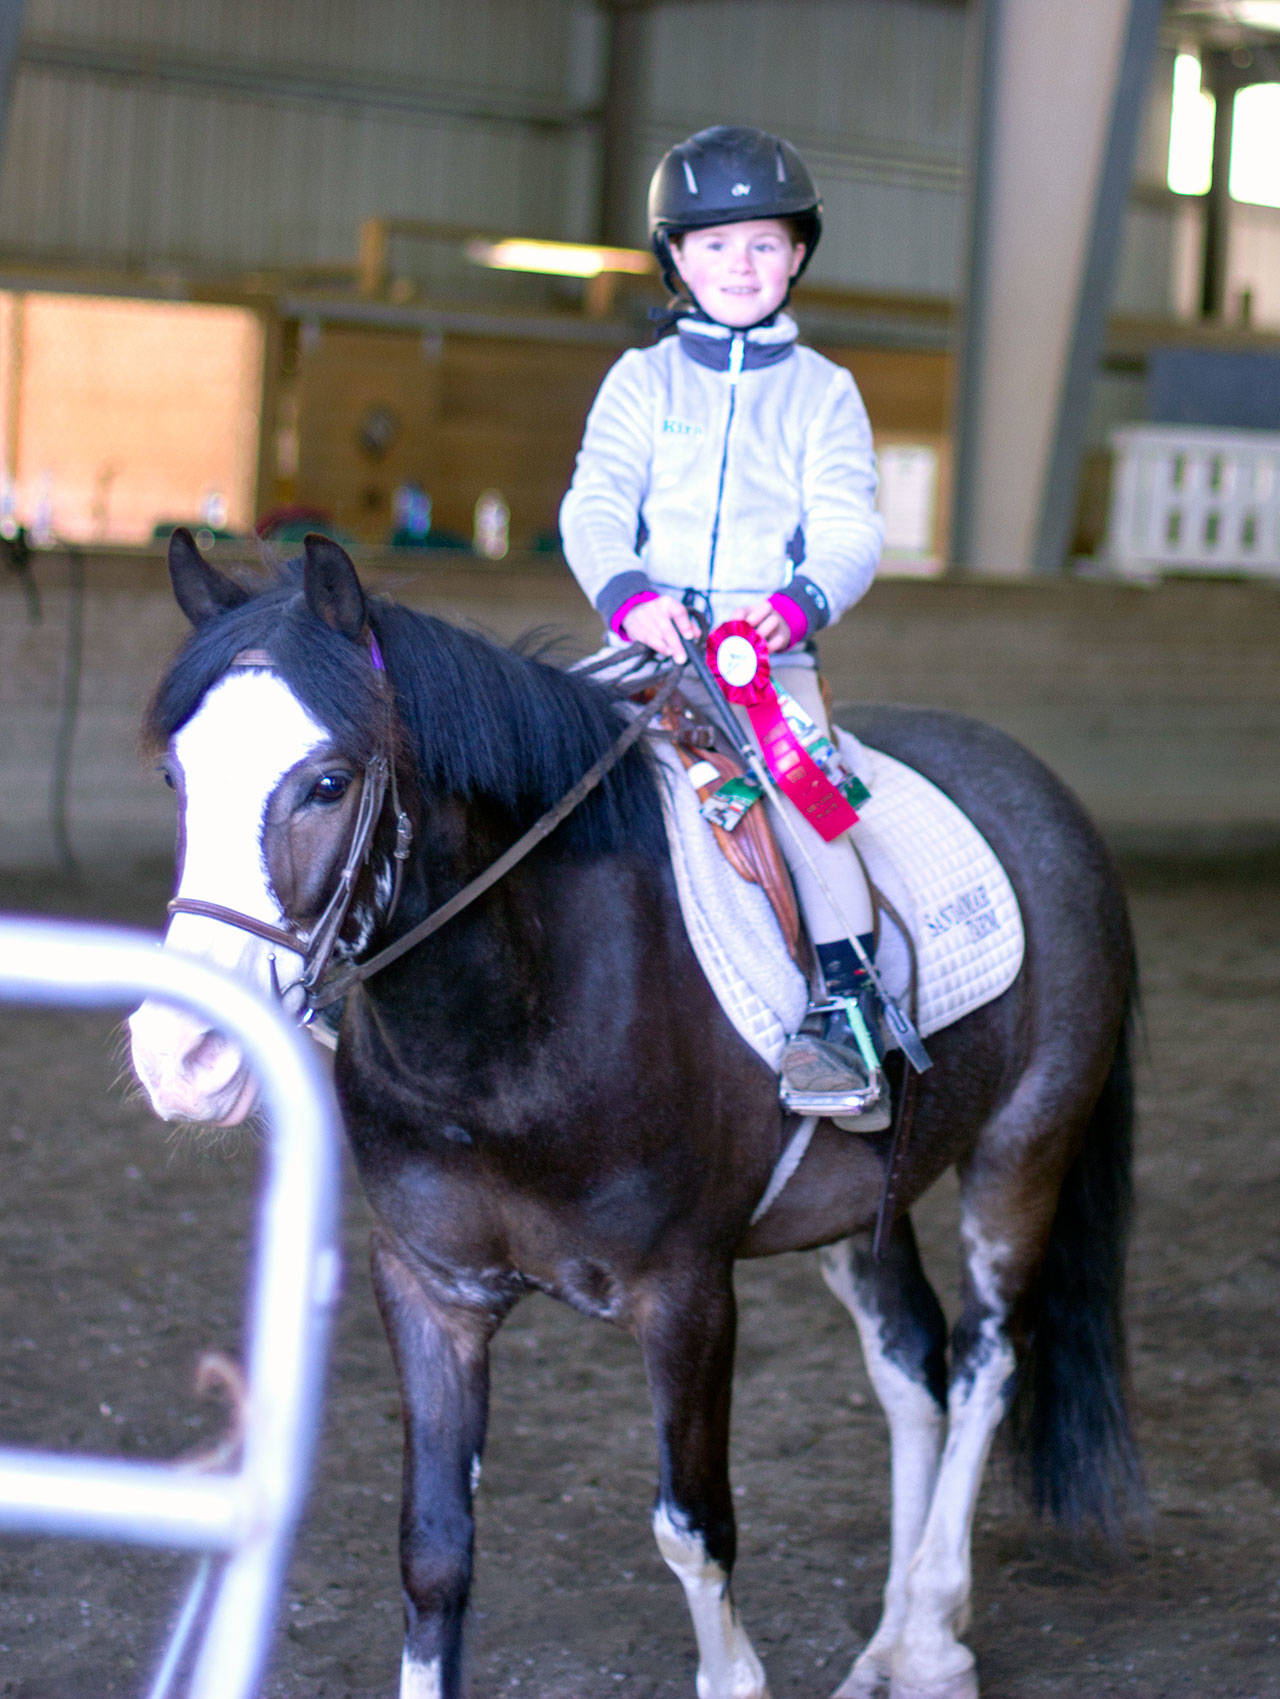 Kira O’Malley poses with her ribbons from the Sandamar Farm Winter Series show, April 15. (Sophie Bonomi / Kitsap News Group)